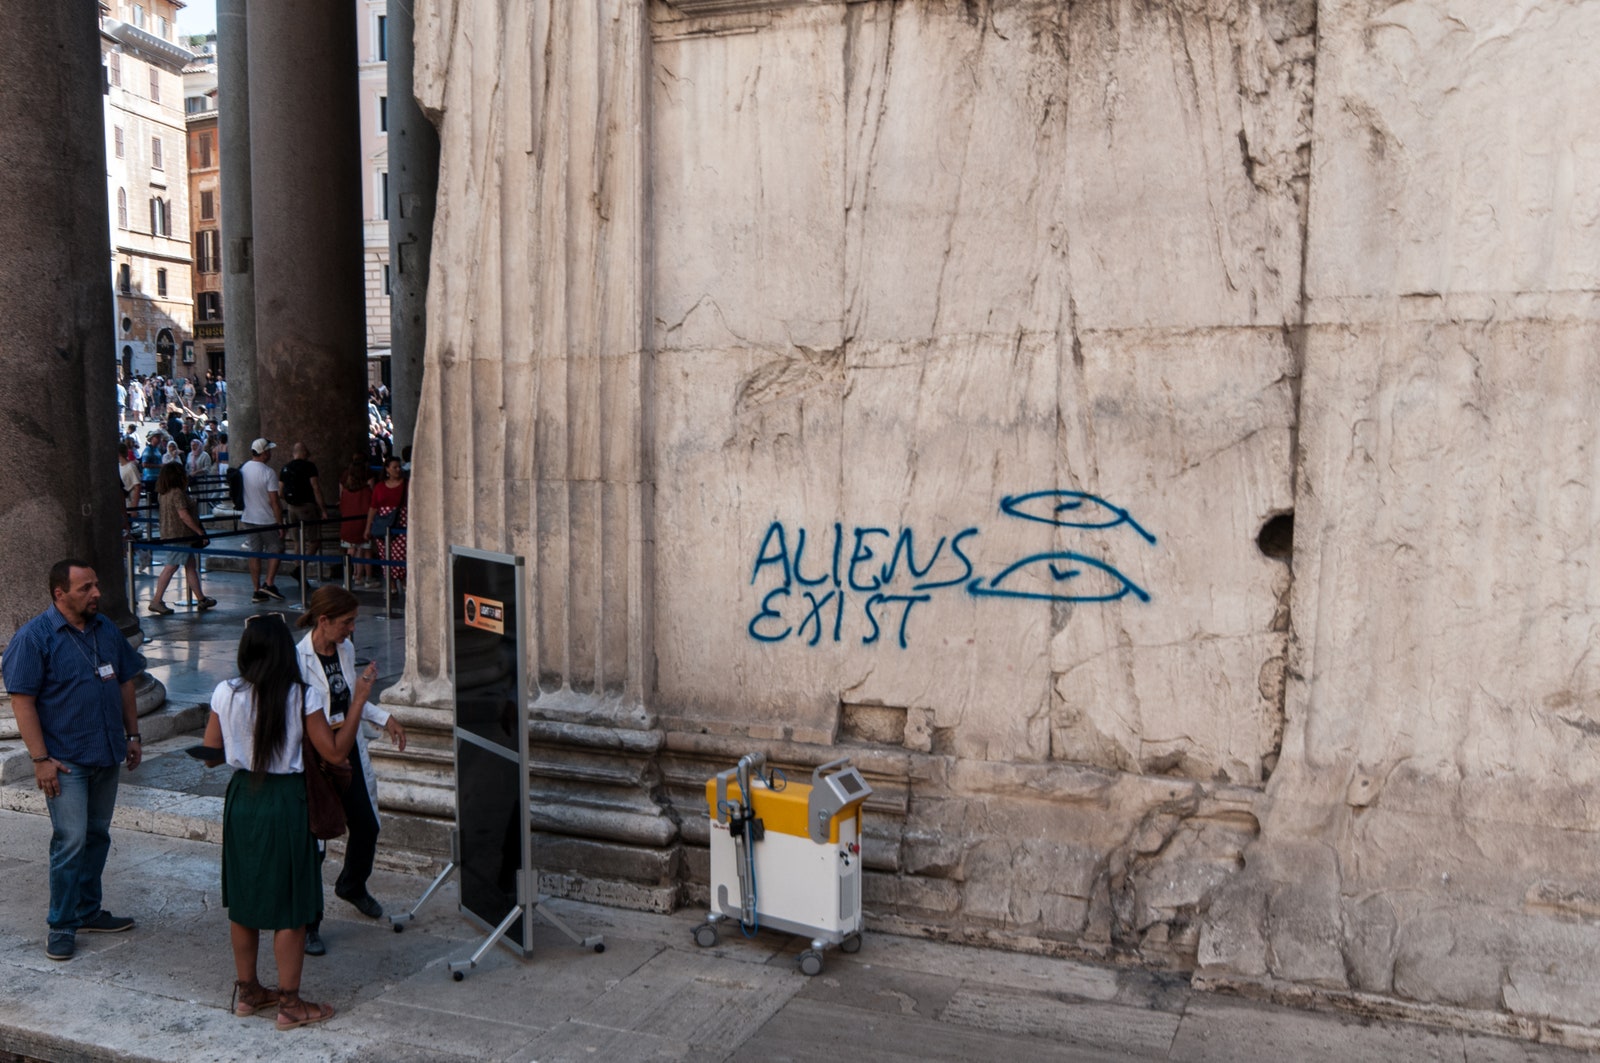 “ALIENS EXIST” blue graffiti on Pantheon wall in Rome Italy